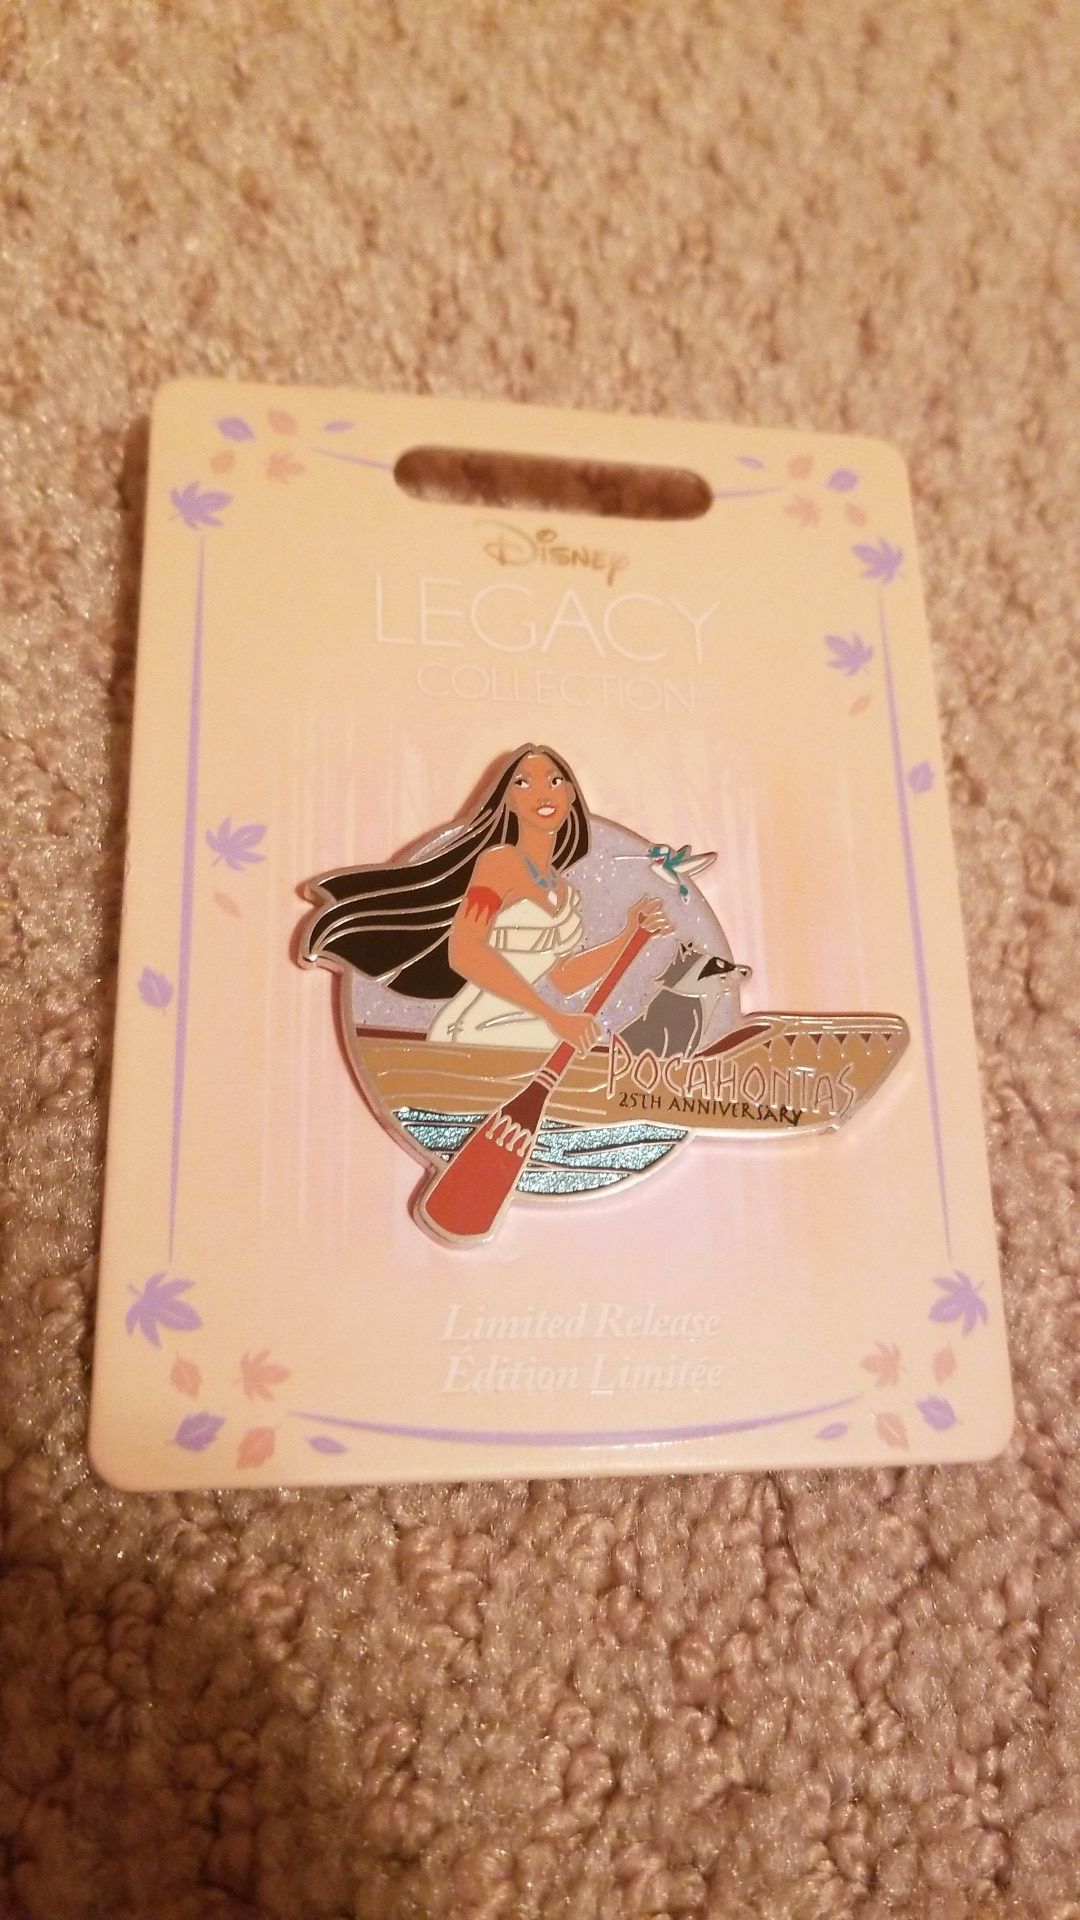 Disney Pocahontas 25th Anniversary Pin - Limited Release- Legacy Collection